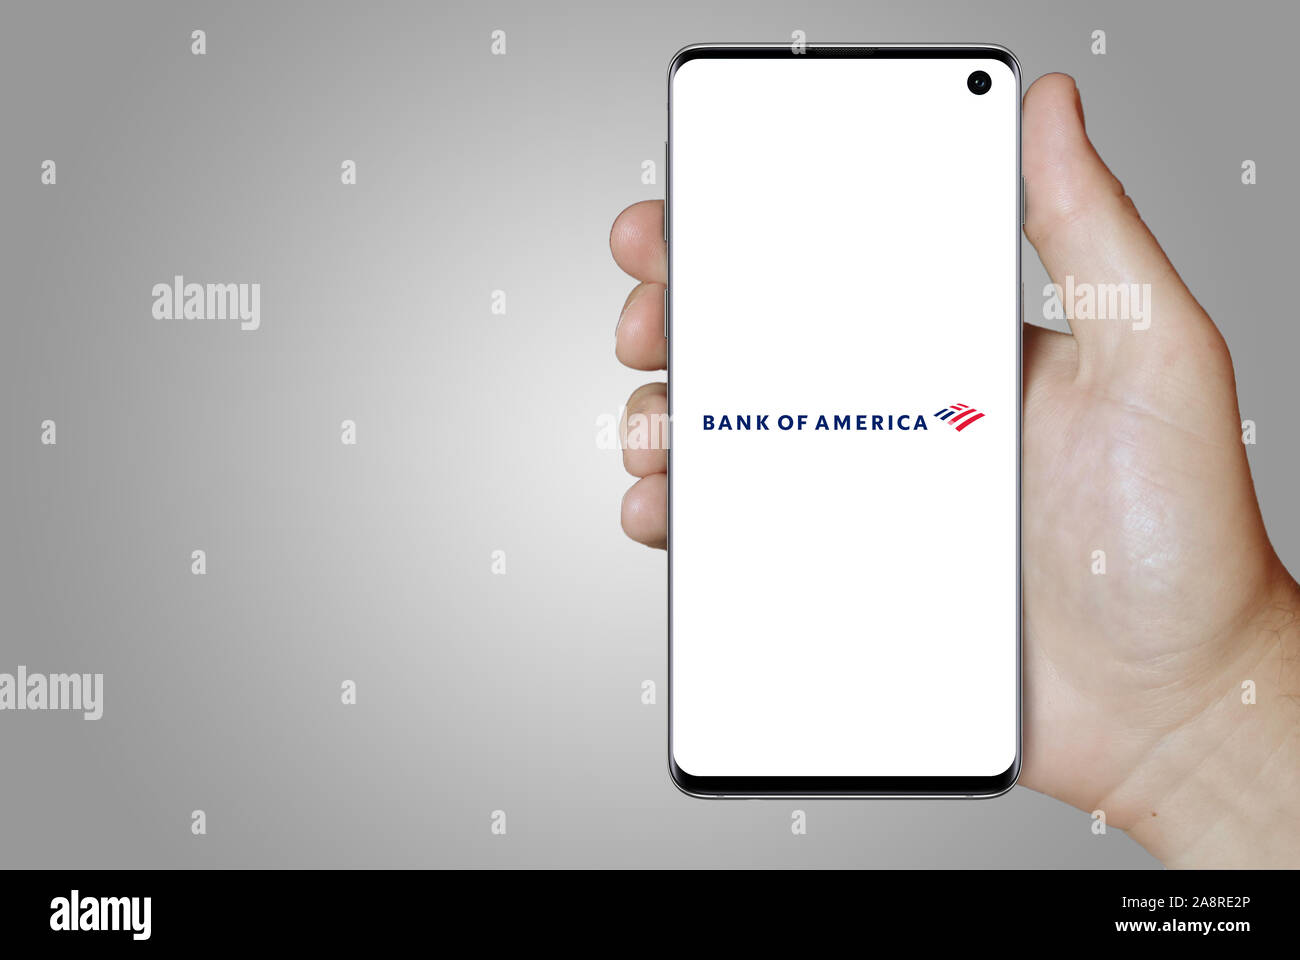 Logo of public company Bank of America Corp displayed on a smartphone. Grey background. Credit: PIXDUCE Stock Photo